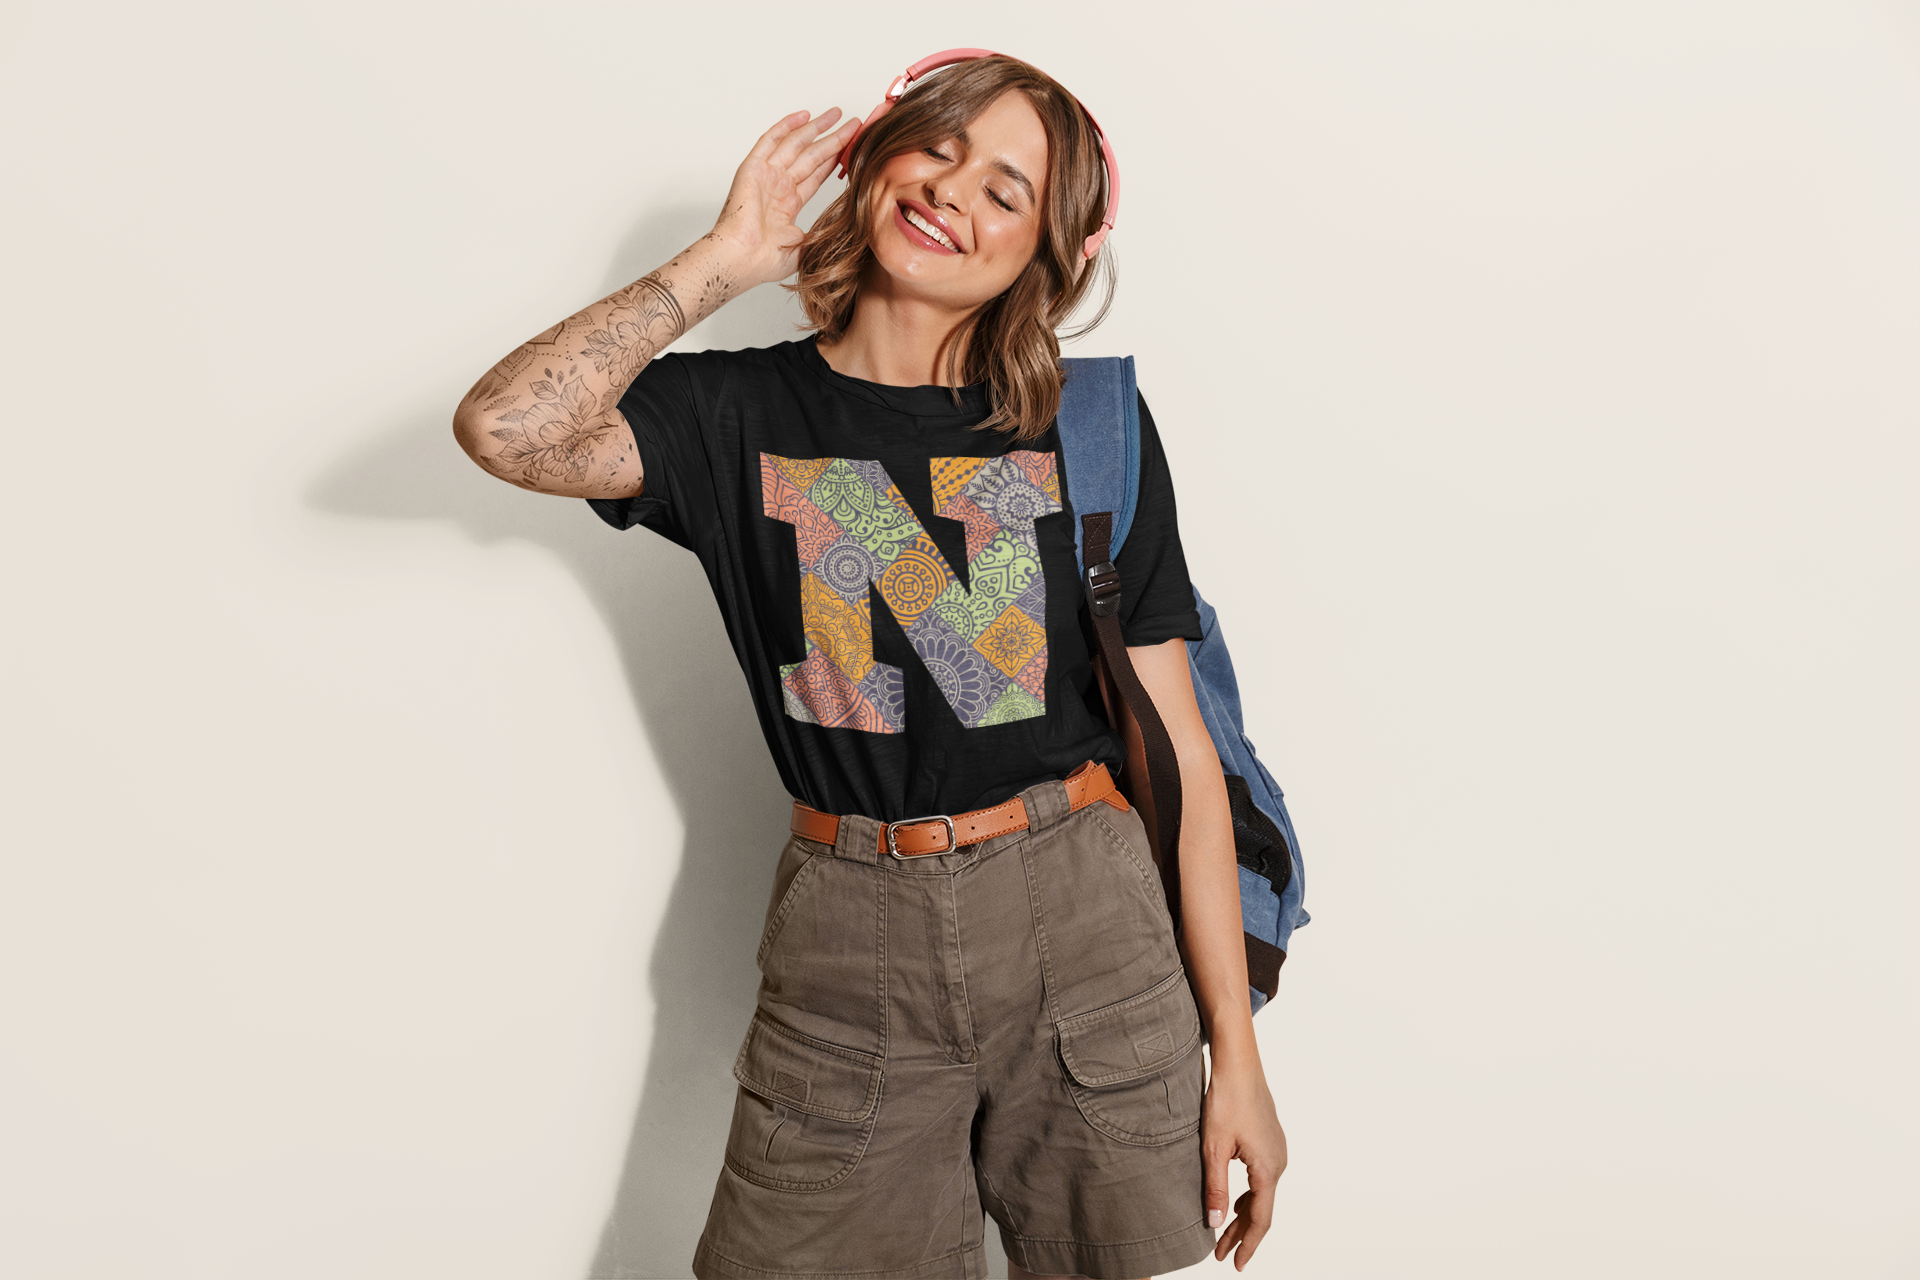 crew-neck-t-shirt-mockup-featuring-a-tattooed-woman-listening-to-music-46313-r-el2.png